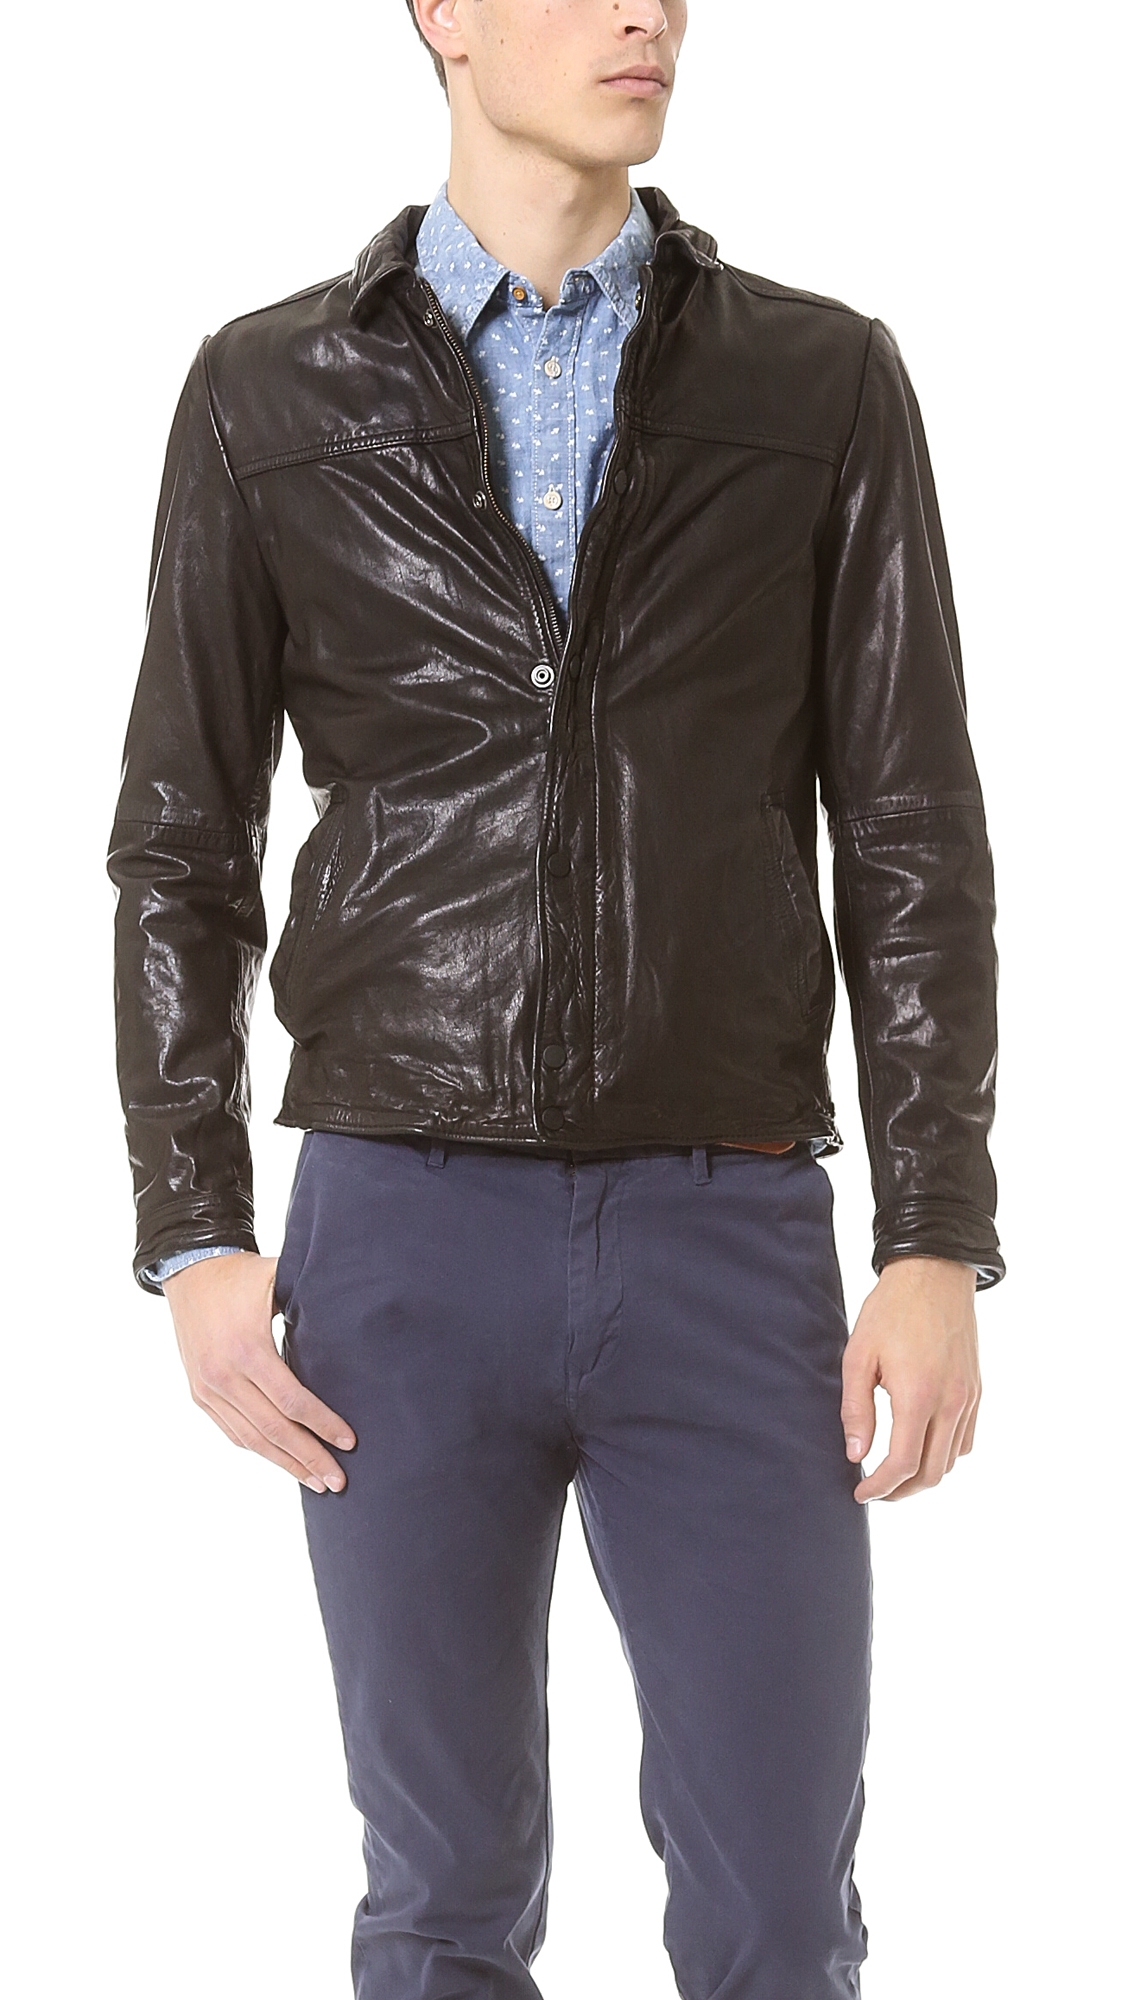 Lyst - Scotch & Soda Vintage Style Leather Jacket in Black for Men